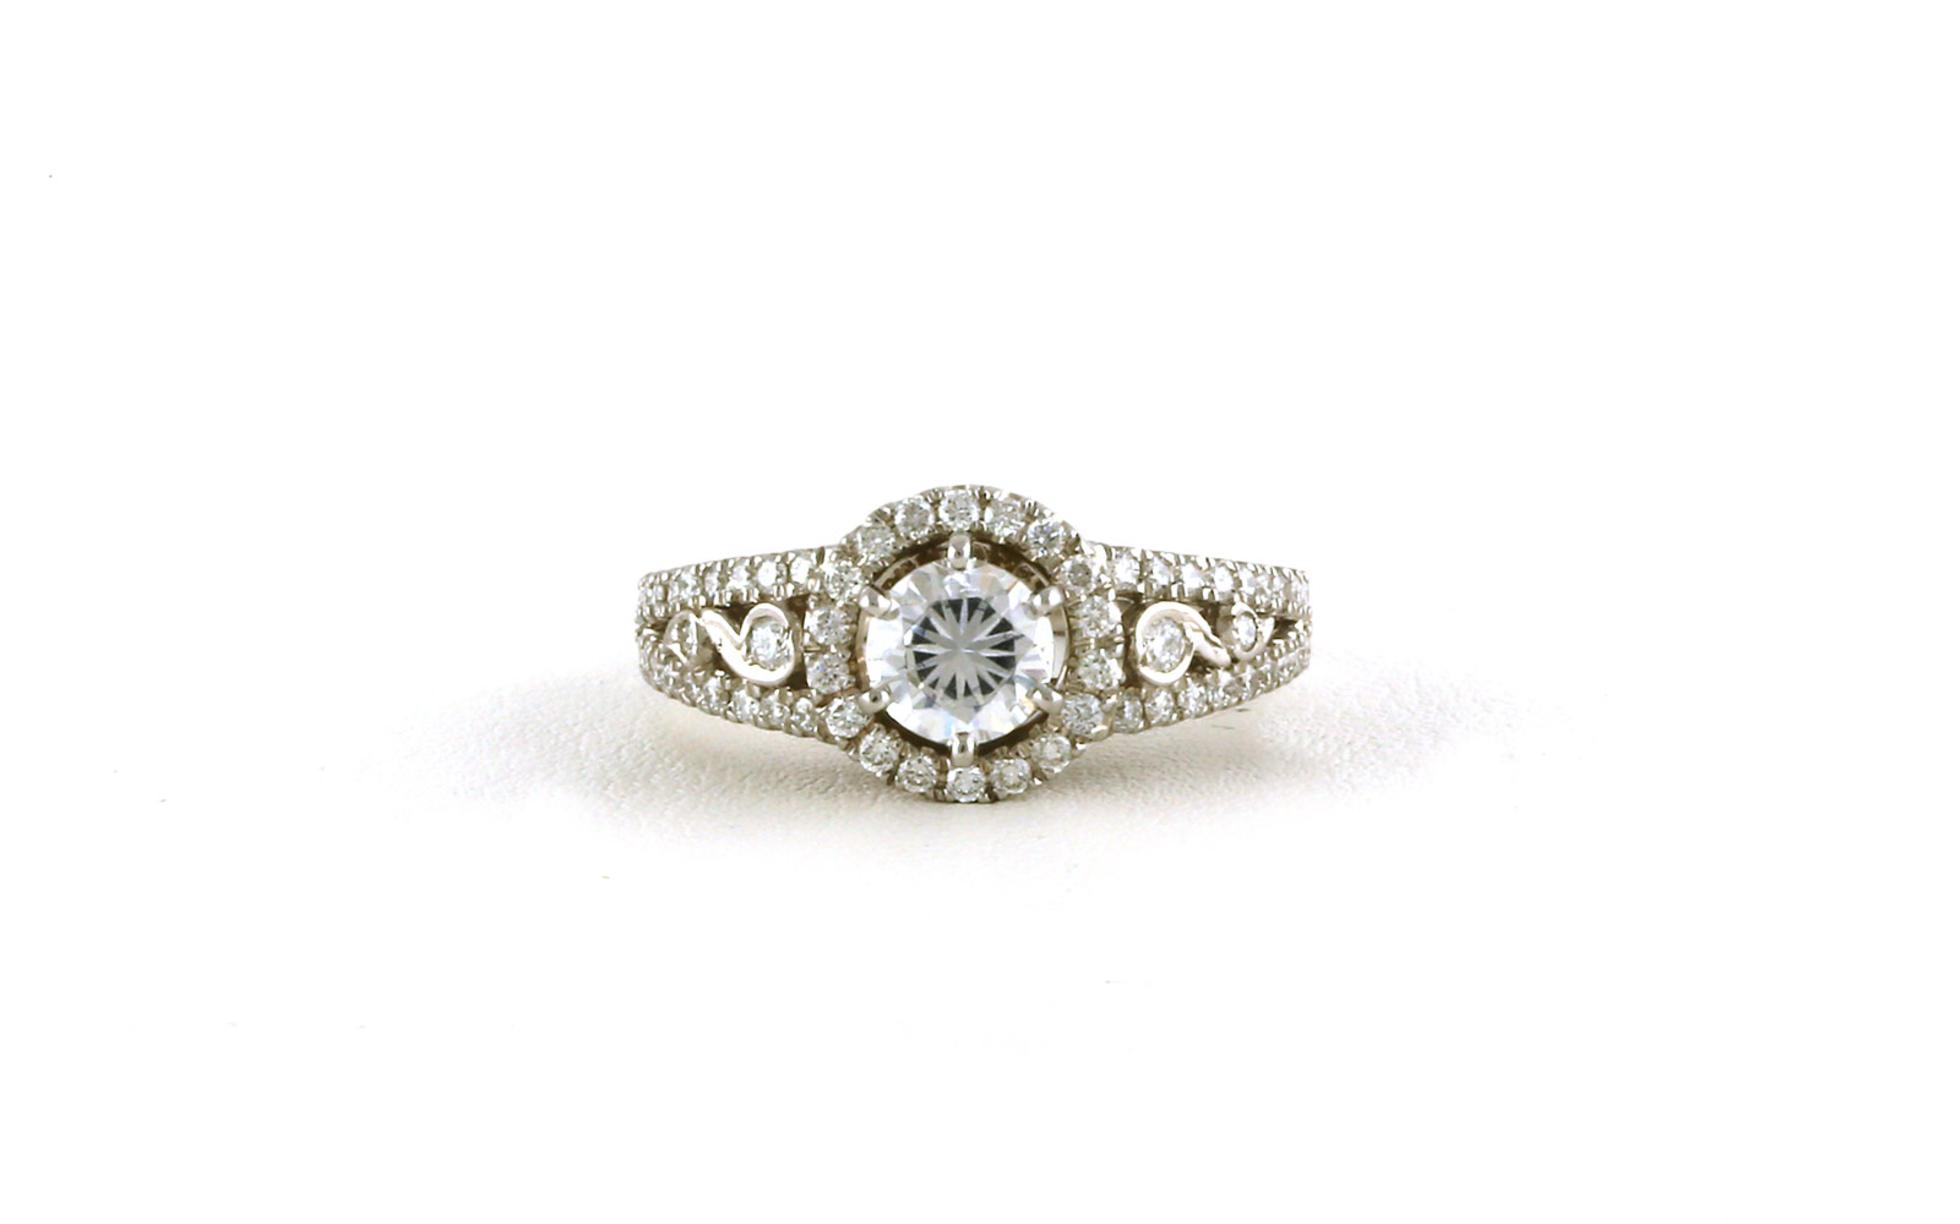 Halo-style Split Shank Engagement Ring Mounting with Bezel-set Diamond Accents in White Gold (0.65cts TWT)